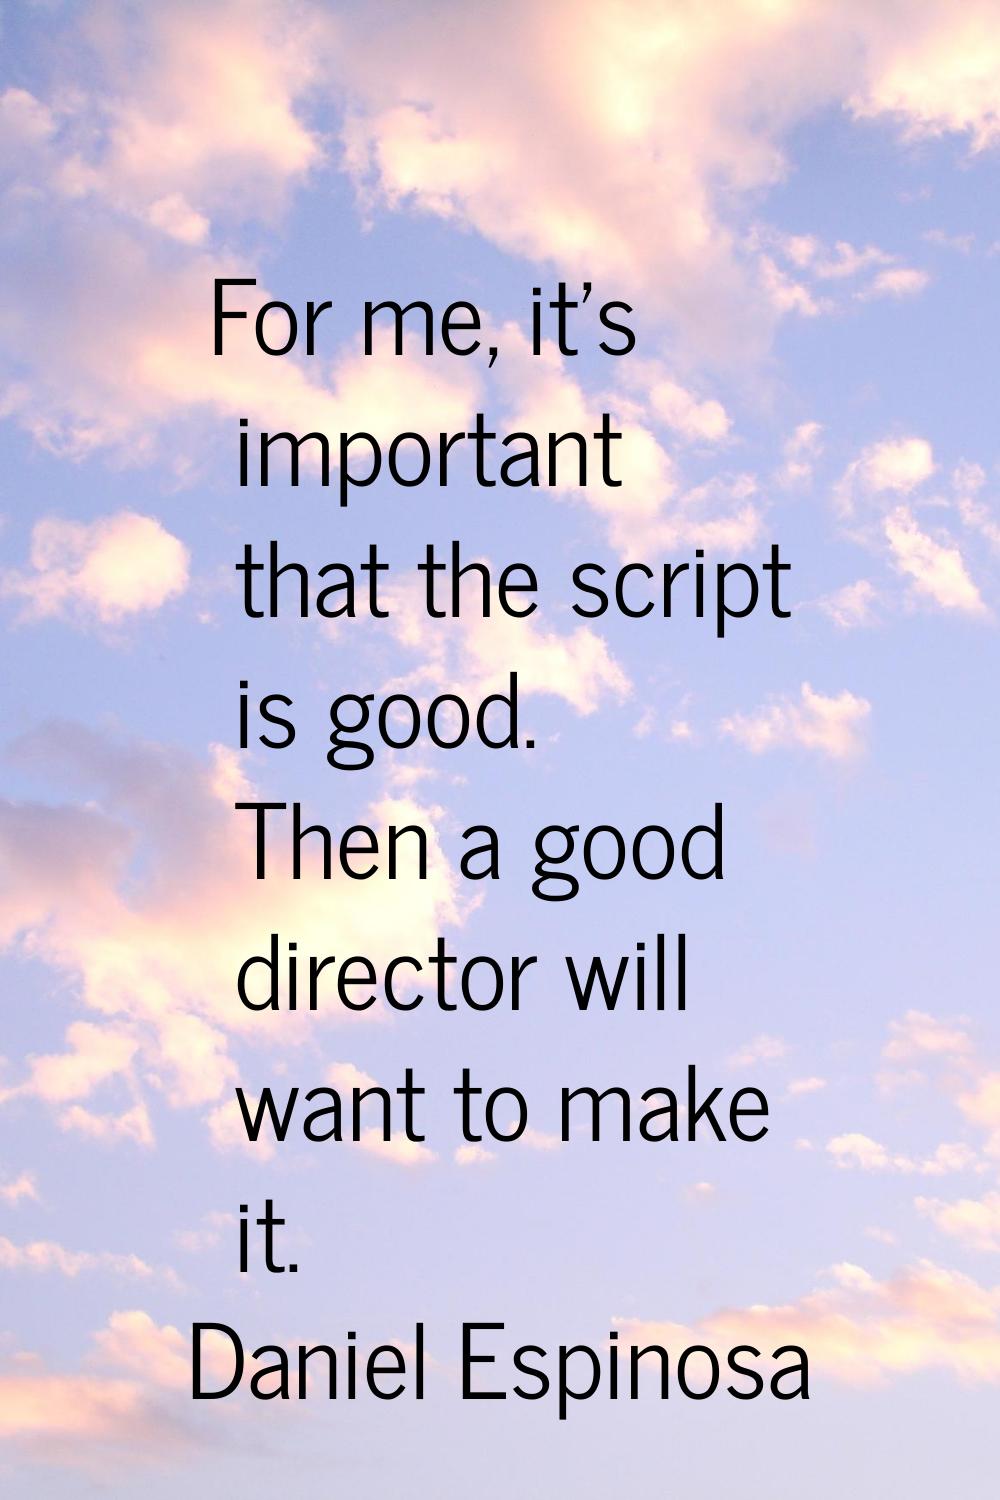 For me, it's important that the script is good. Then a good director will want to make it.